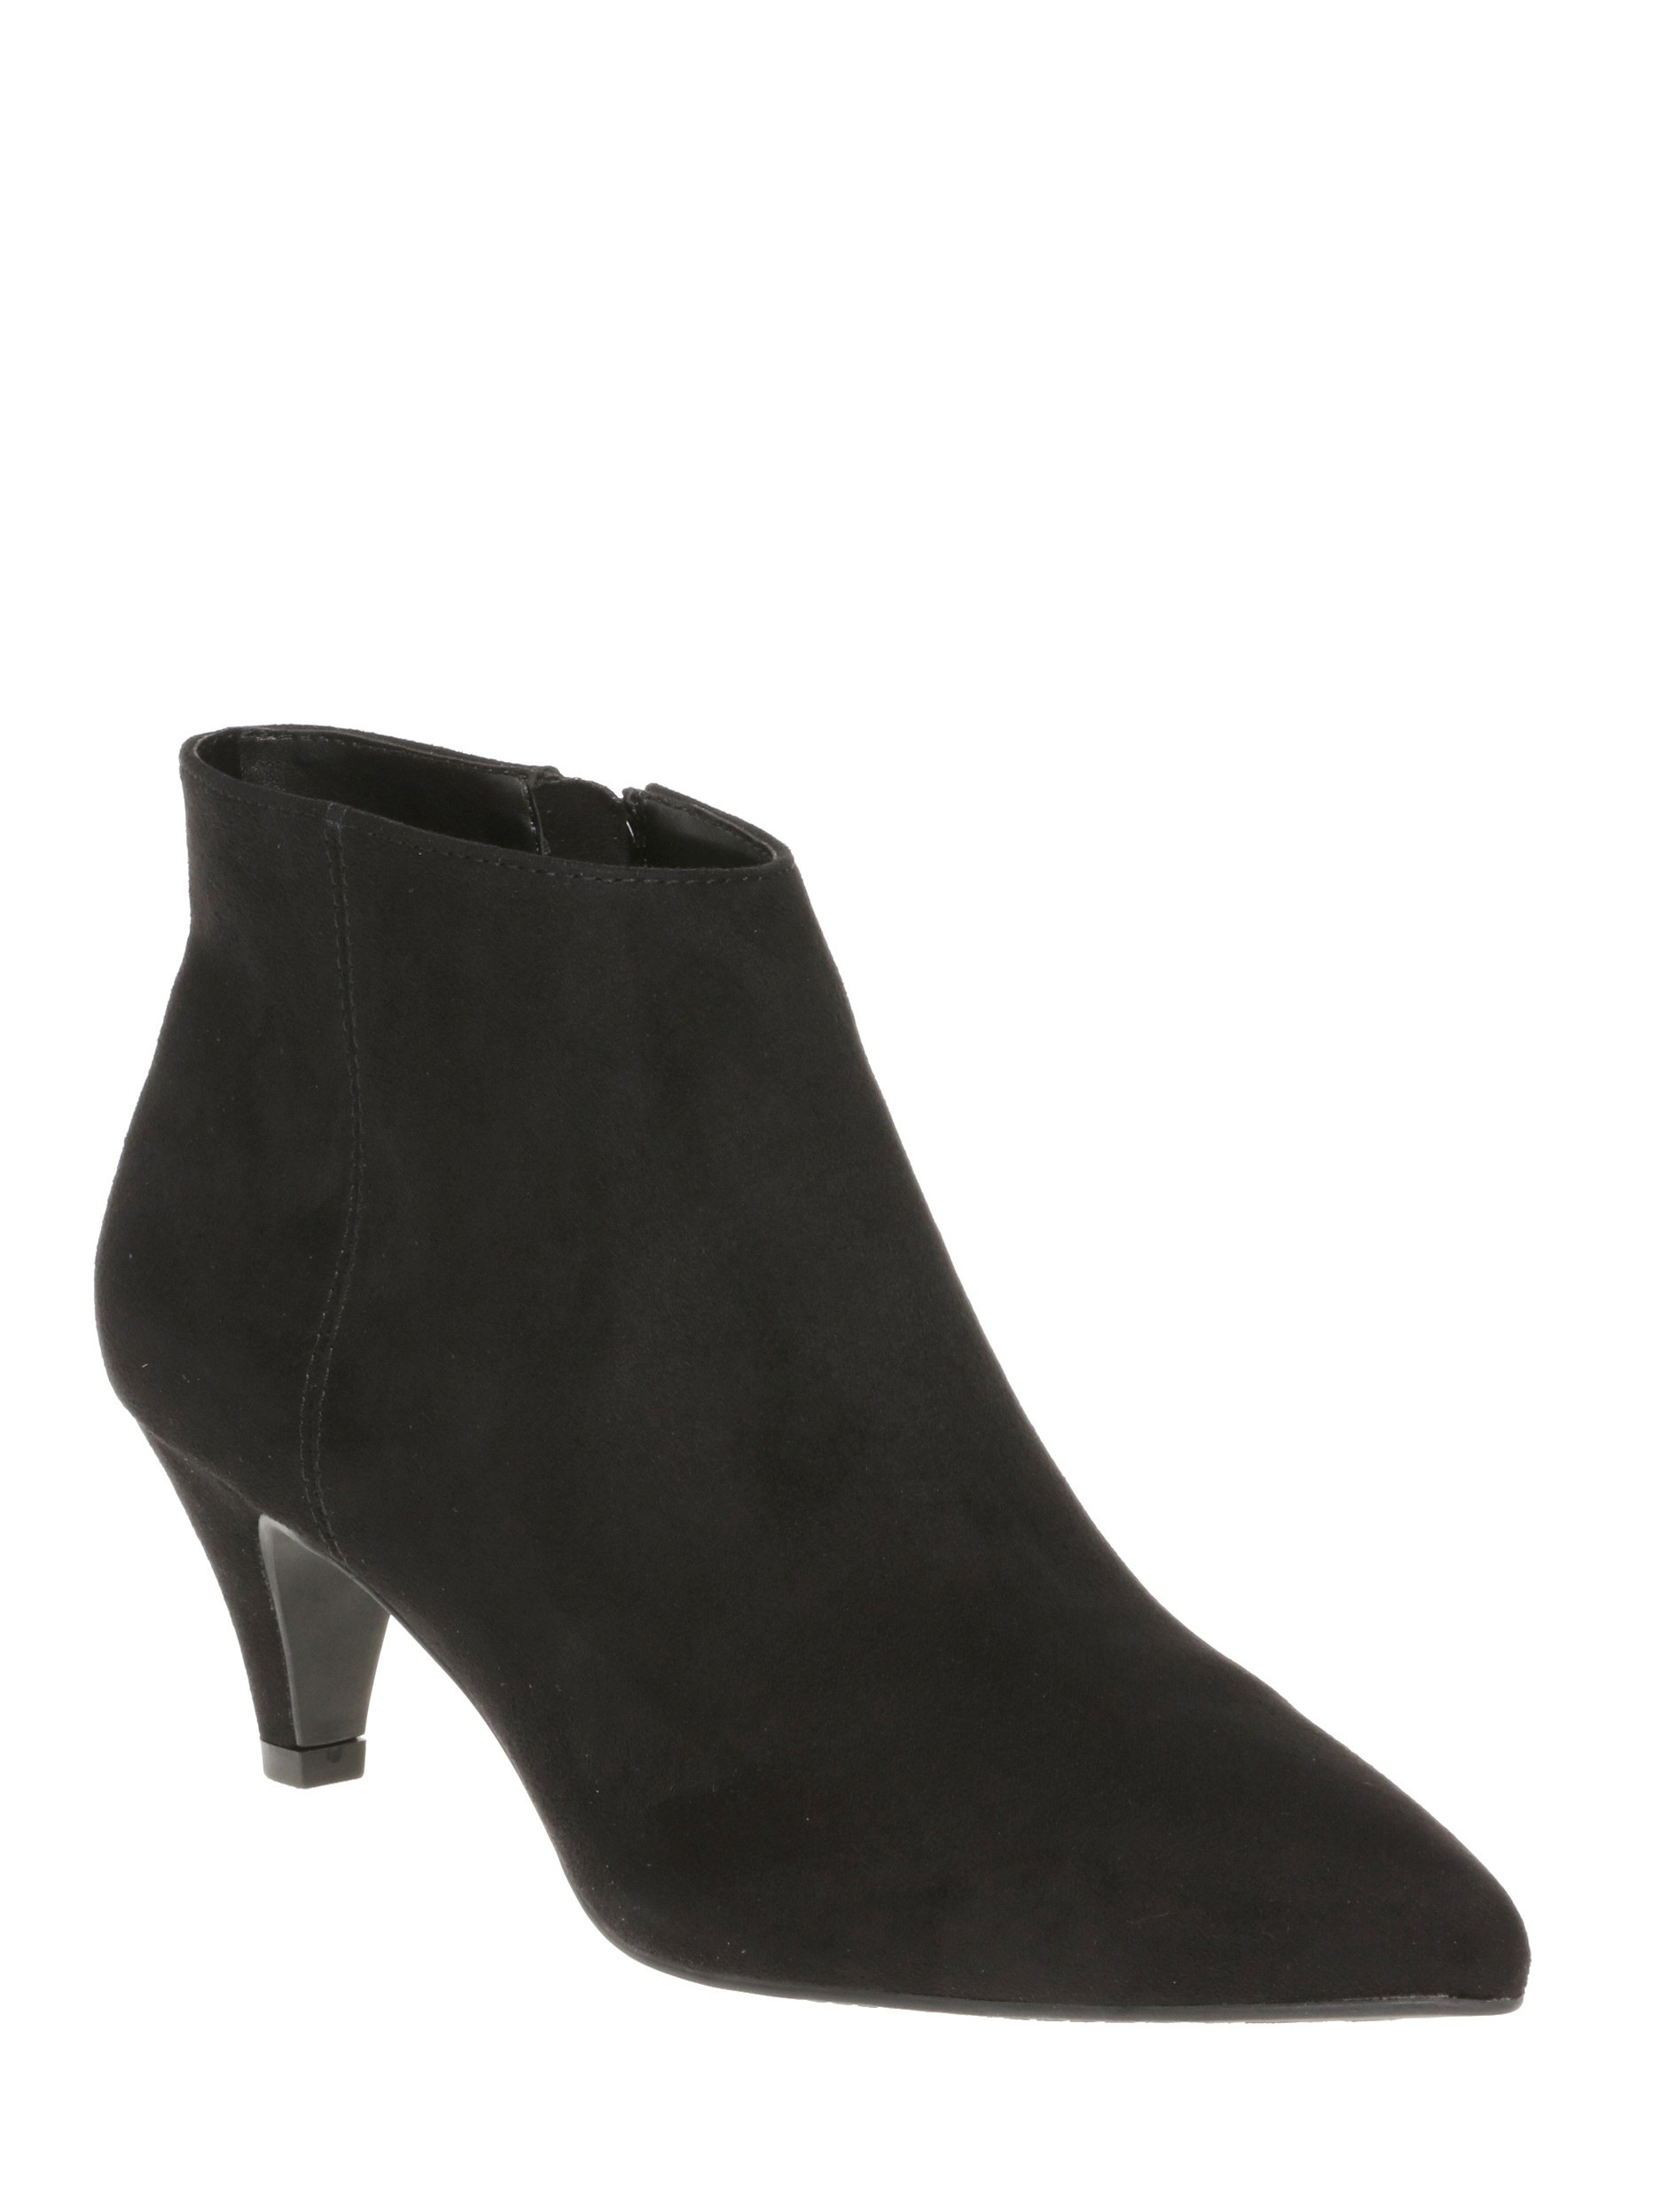 walmart ankle boots